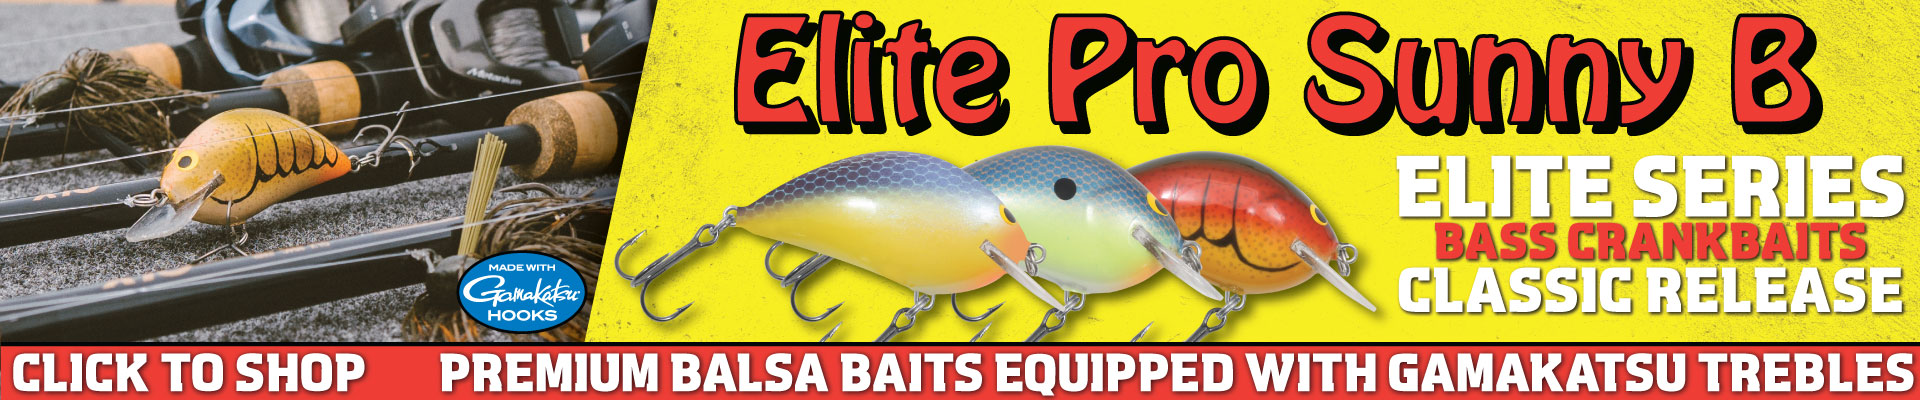 New Northland Fishing Tackle Elite Pro Sunny B balsa crankbait, spring time bass fishing must have.